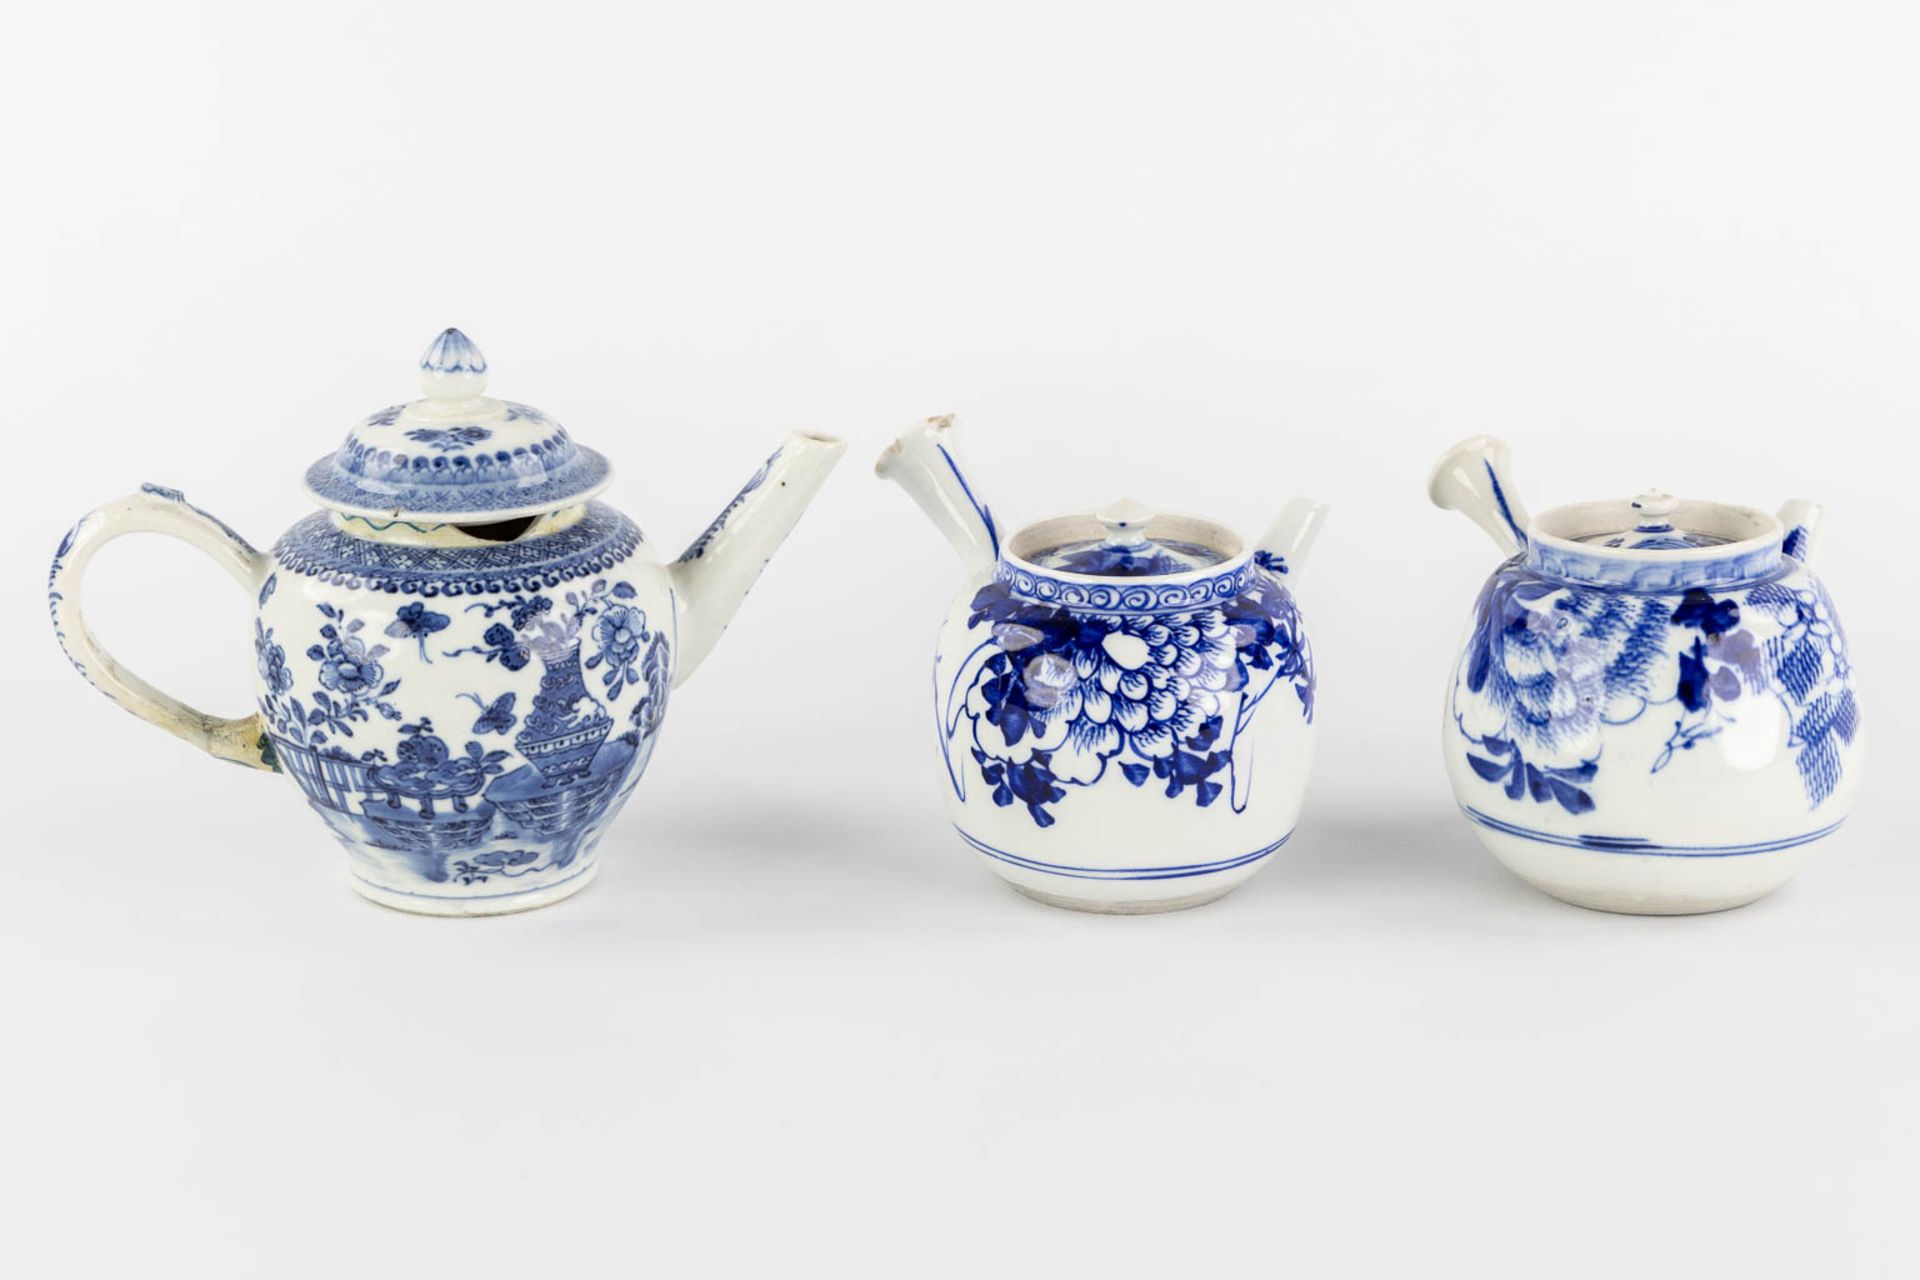 Three Chinese and Japanese teapots, blue-white decor. (W:20 x H:14 cm) - Image 3 of 17